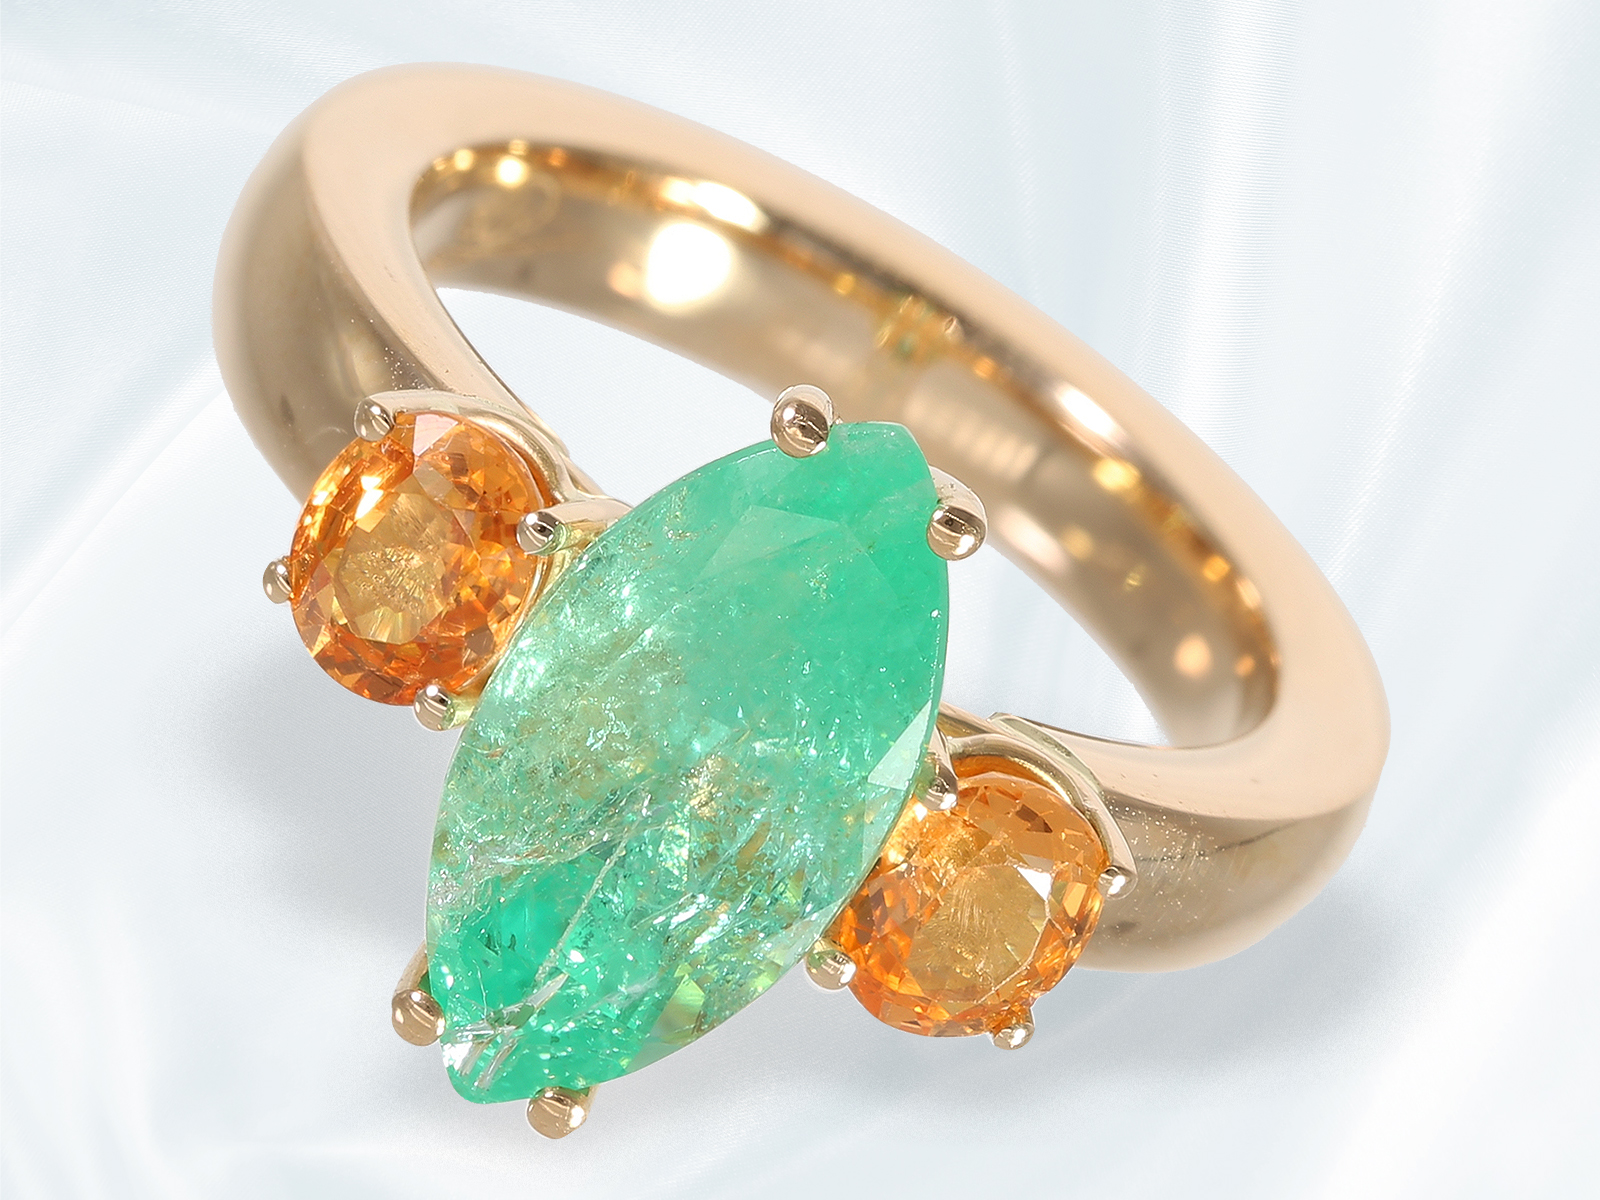 Handmade ring in like new condition with emerald of approx. 2ct, Schupp factory from Pforzheim, Germ - Image 5 of 6